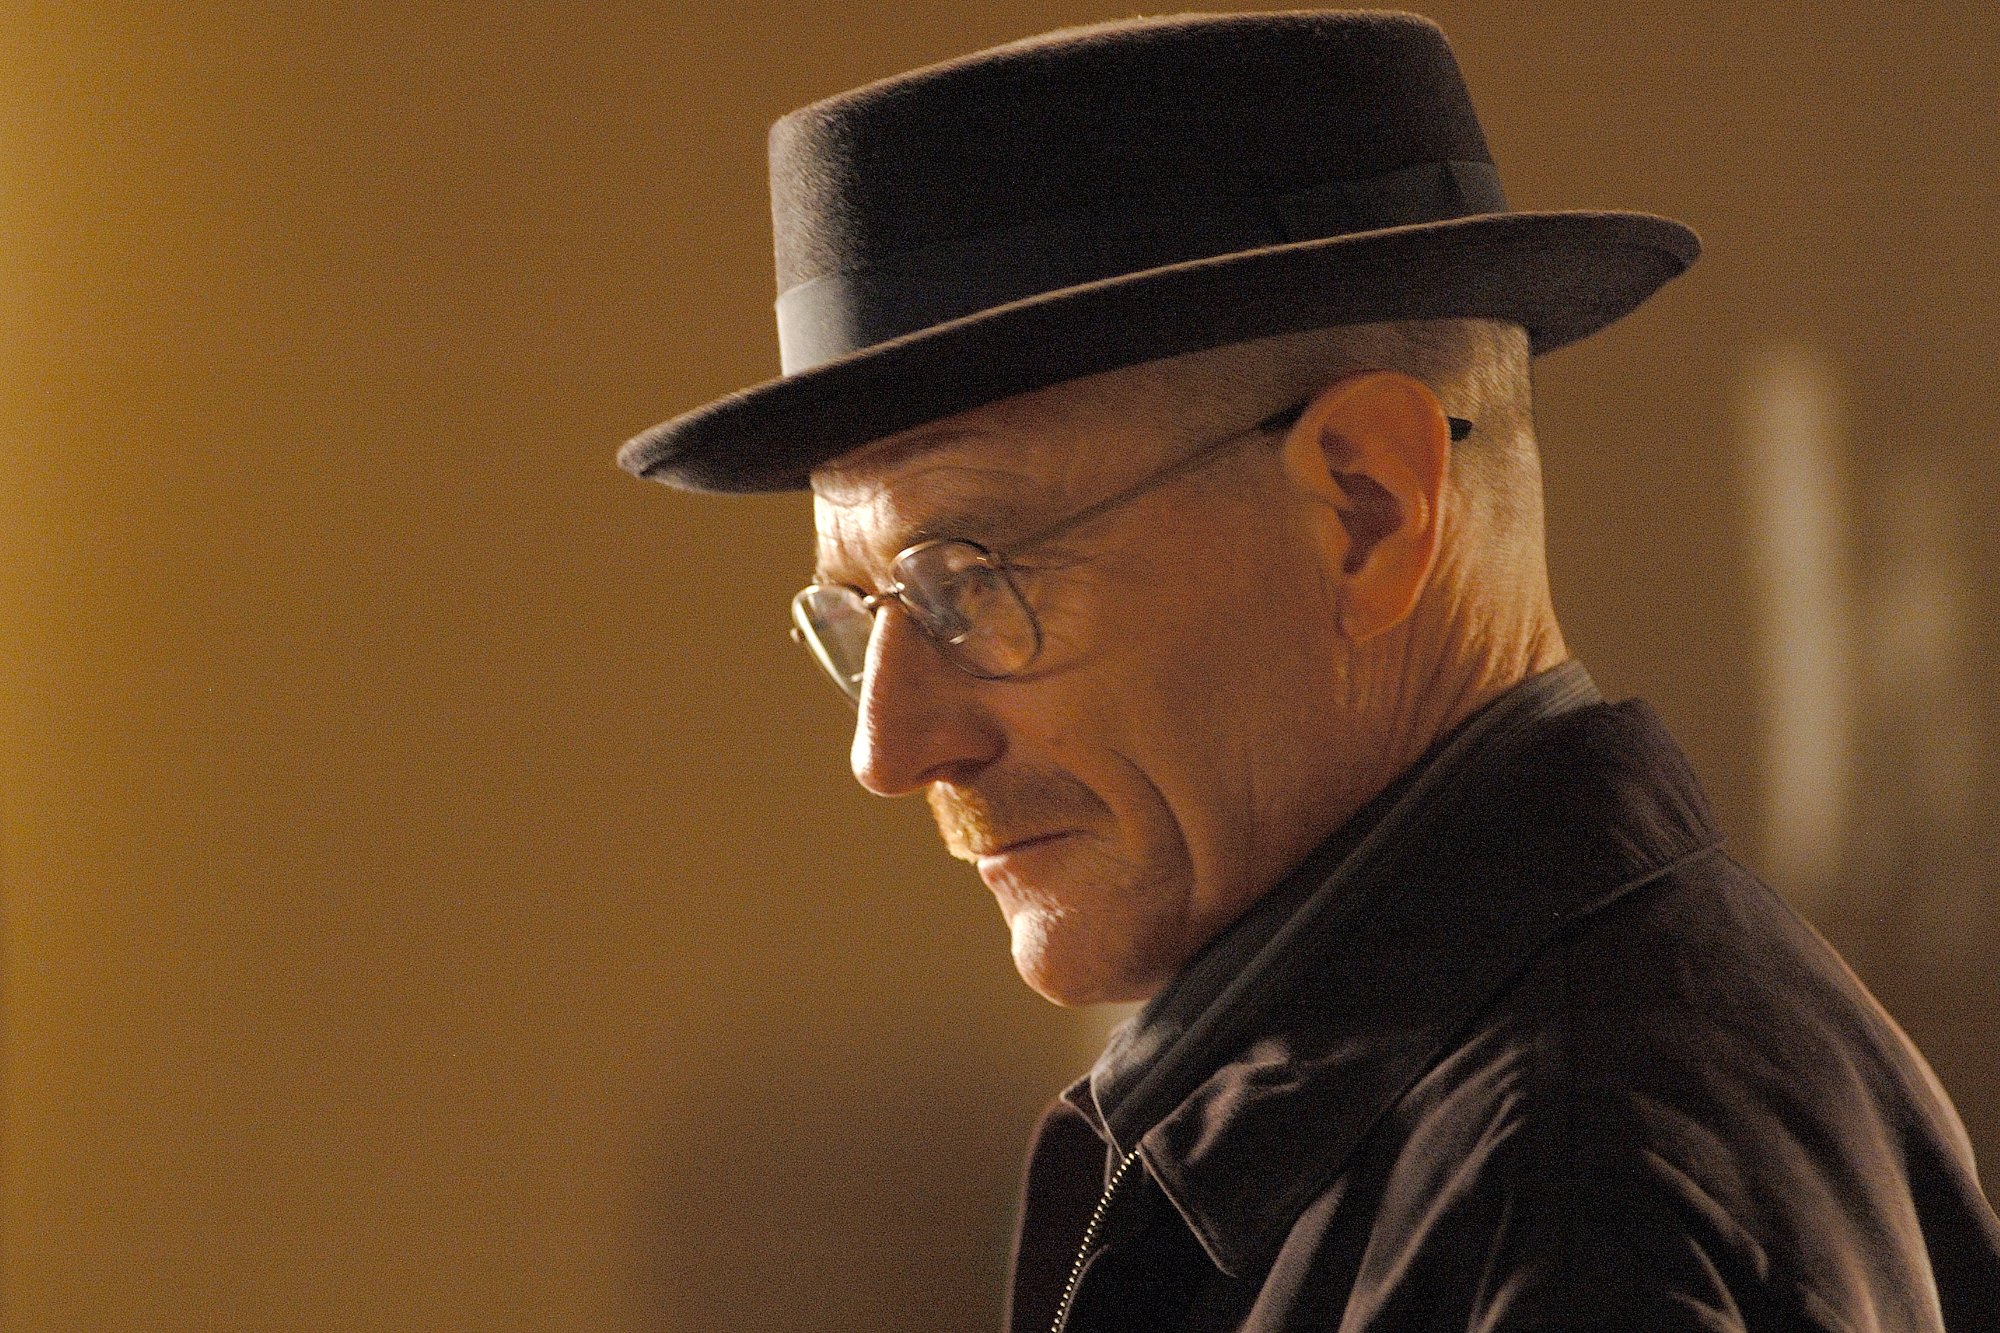 'Breaking Bad' Why Does Walter White Call Himself Heisenberg? A Real